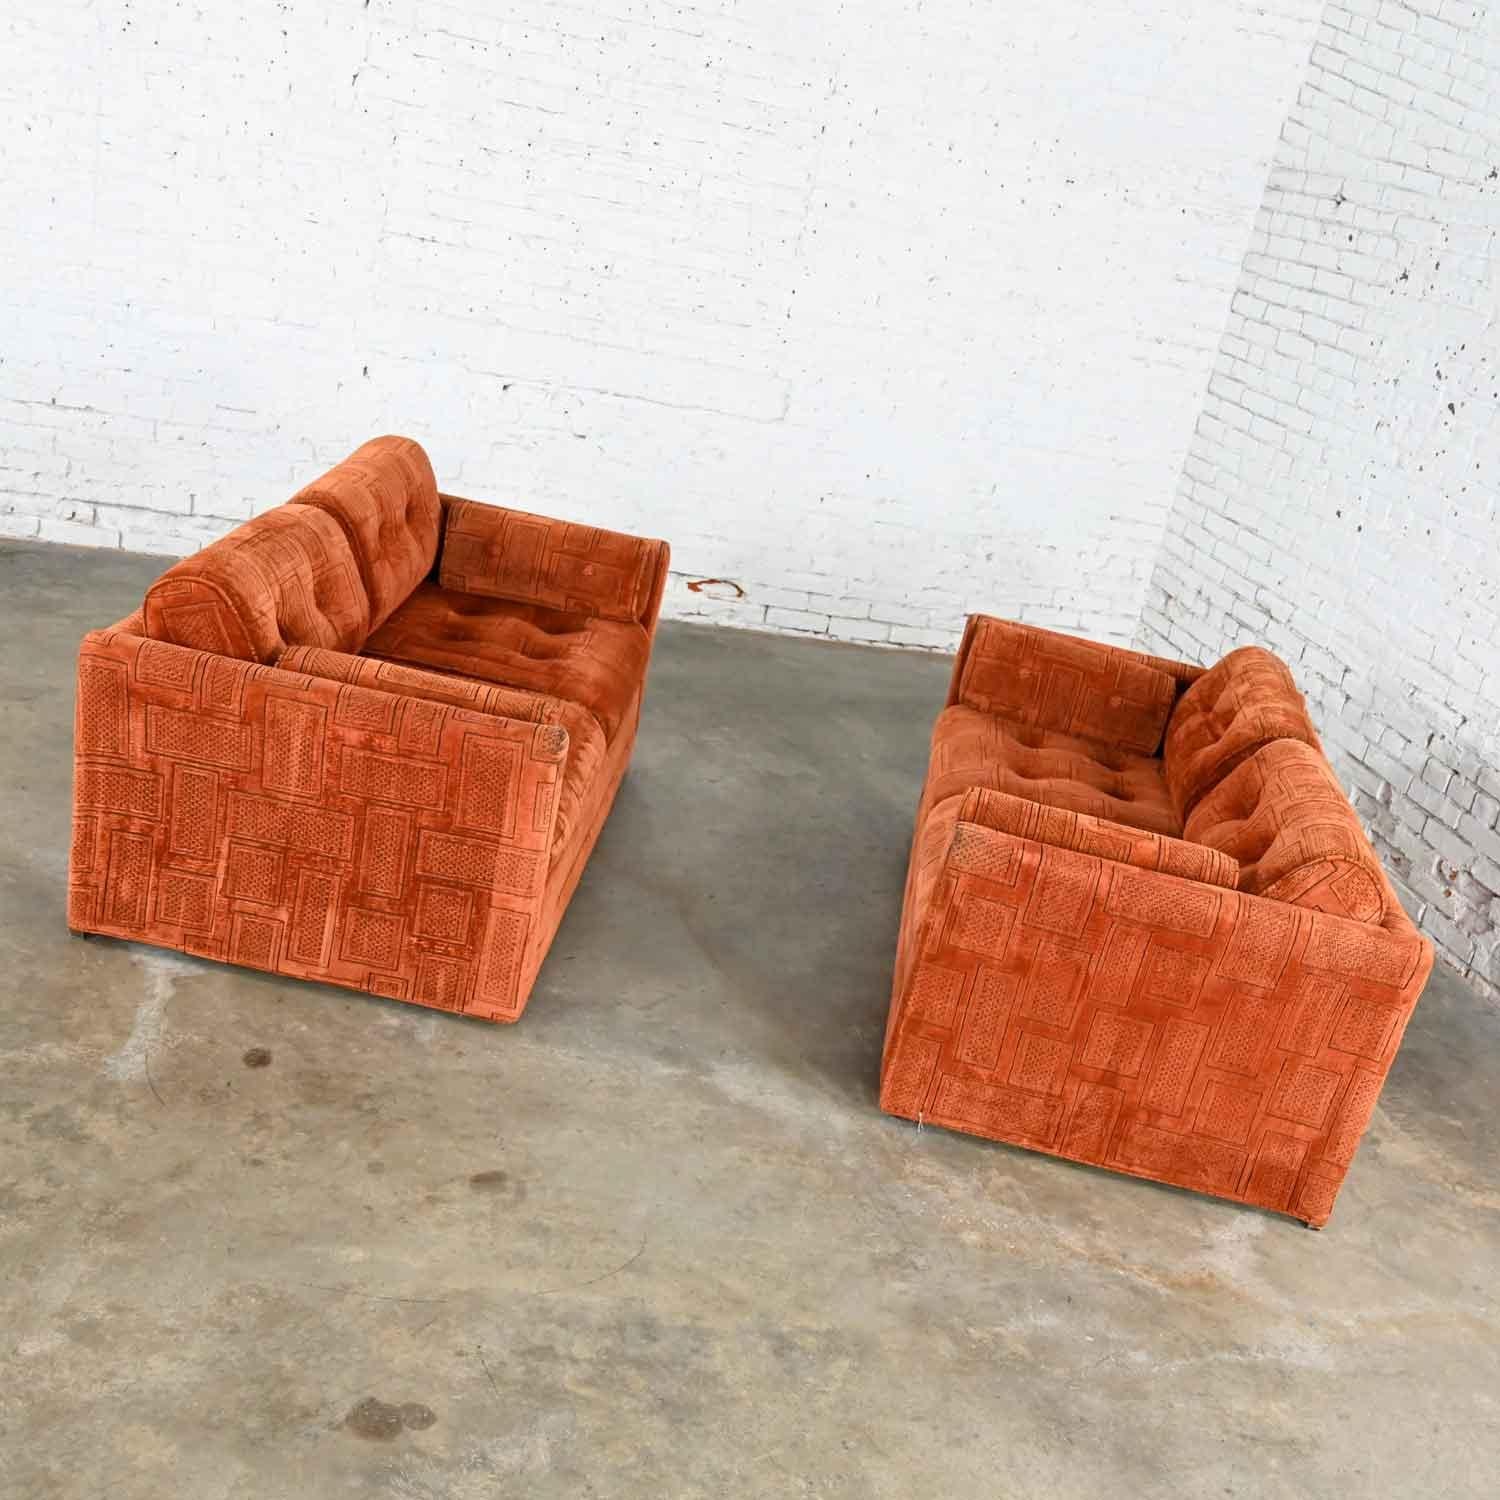 American Vintage Modern Tuxedo Style Love Seats Rust Fabric by Pem-Kay Furniture a Pair